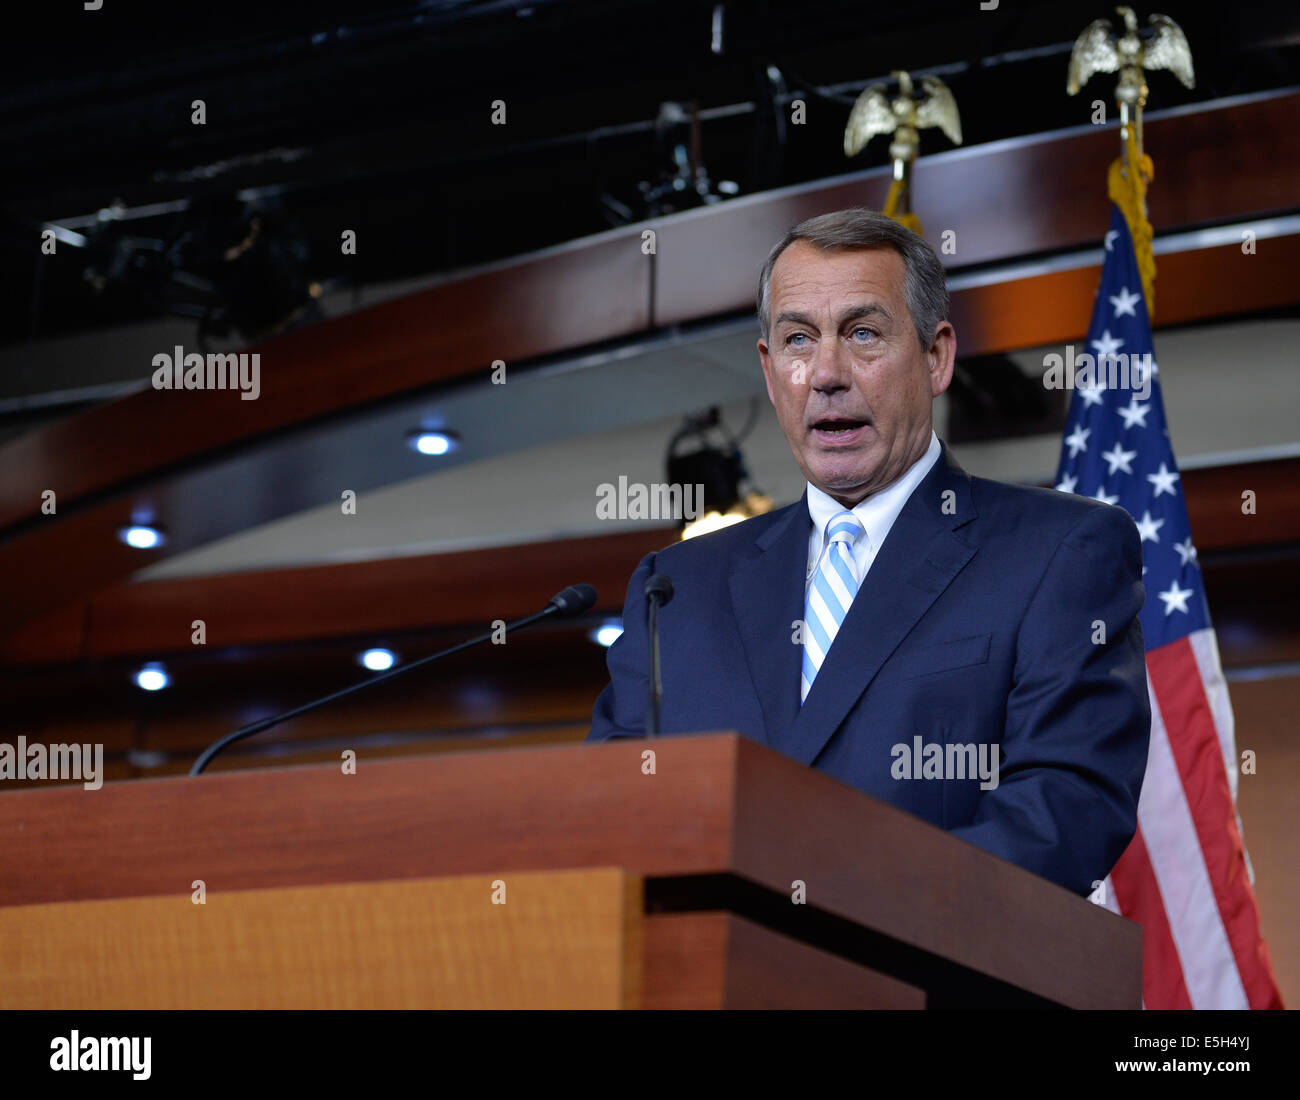 Washington, DC, USA. 31st July, 2014. John Boehner, Speaker of the United States House of Representatives, speaks to media on a news conference on Capitol Hill in Washington, DC, capital of the United States, July 31, 2014. The U.S. House of Representative Speaker John Boehner warned on Thursday that any unilateral actions on immigration reform by U.S. President Obama would risk a "legacy of lawlessness." Credit:  Bao Dandan/Xinhua/Alamy Live News Stock Photo